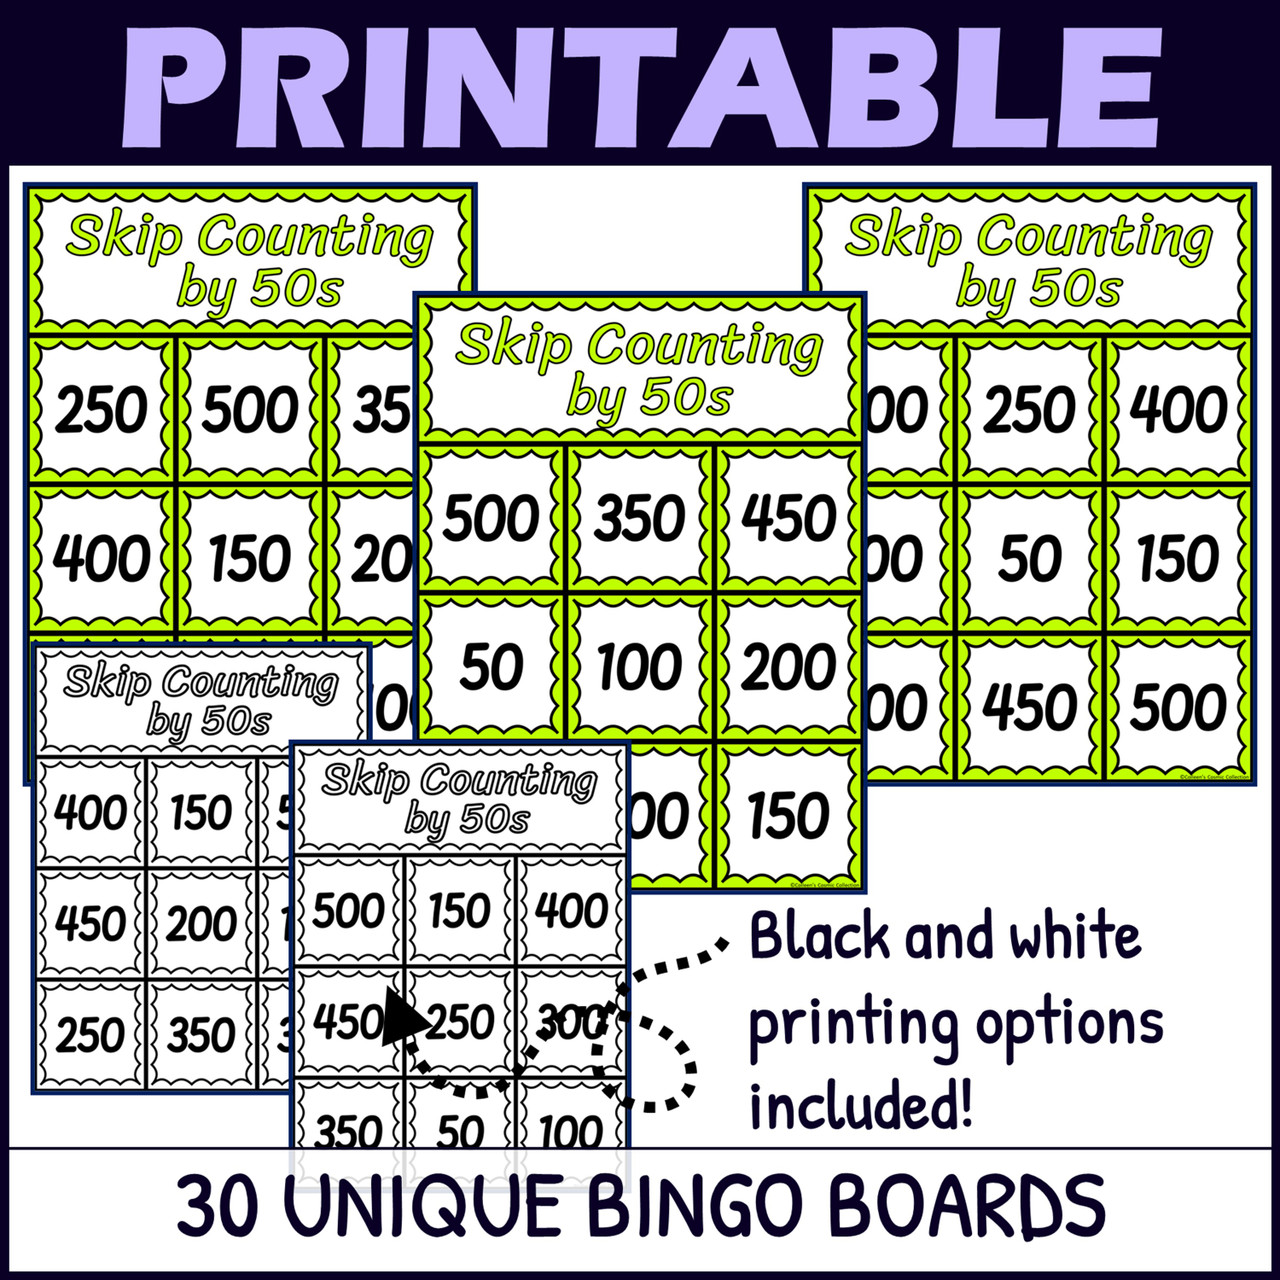 Skip Counting by 50s Activity - Bingo Game - Printable and Digital